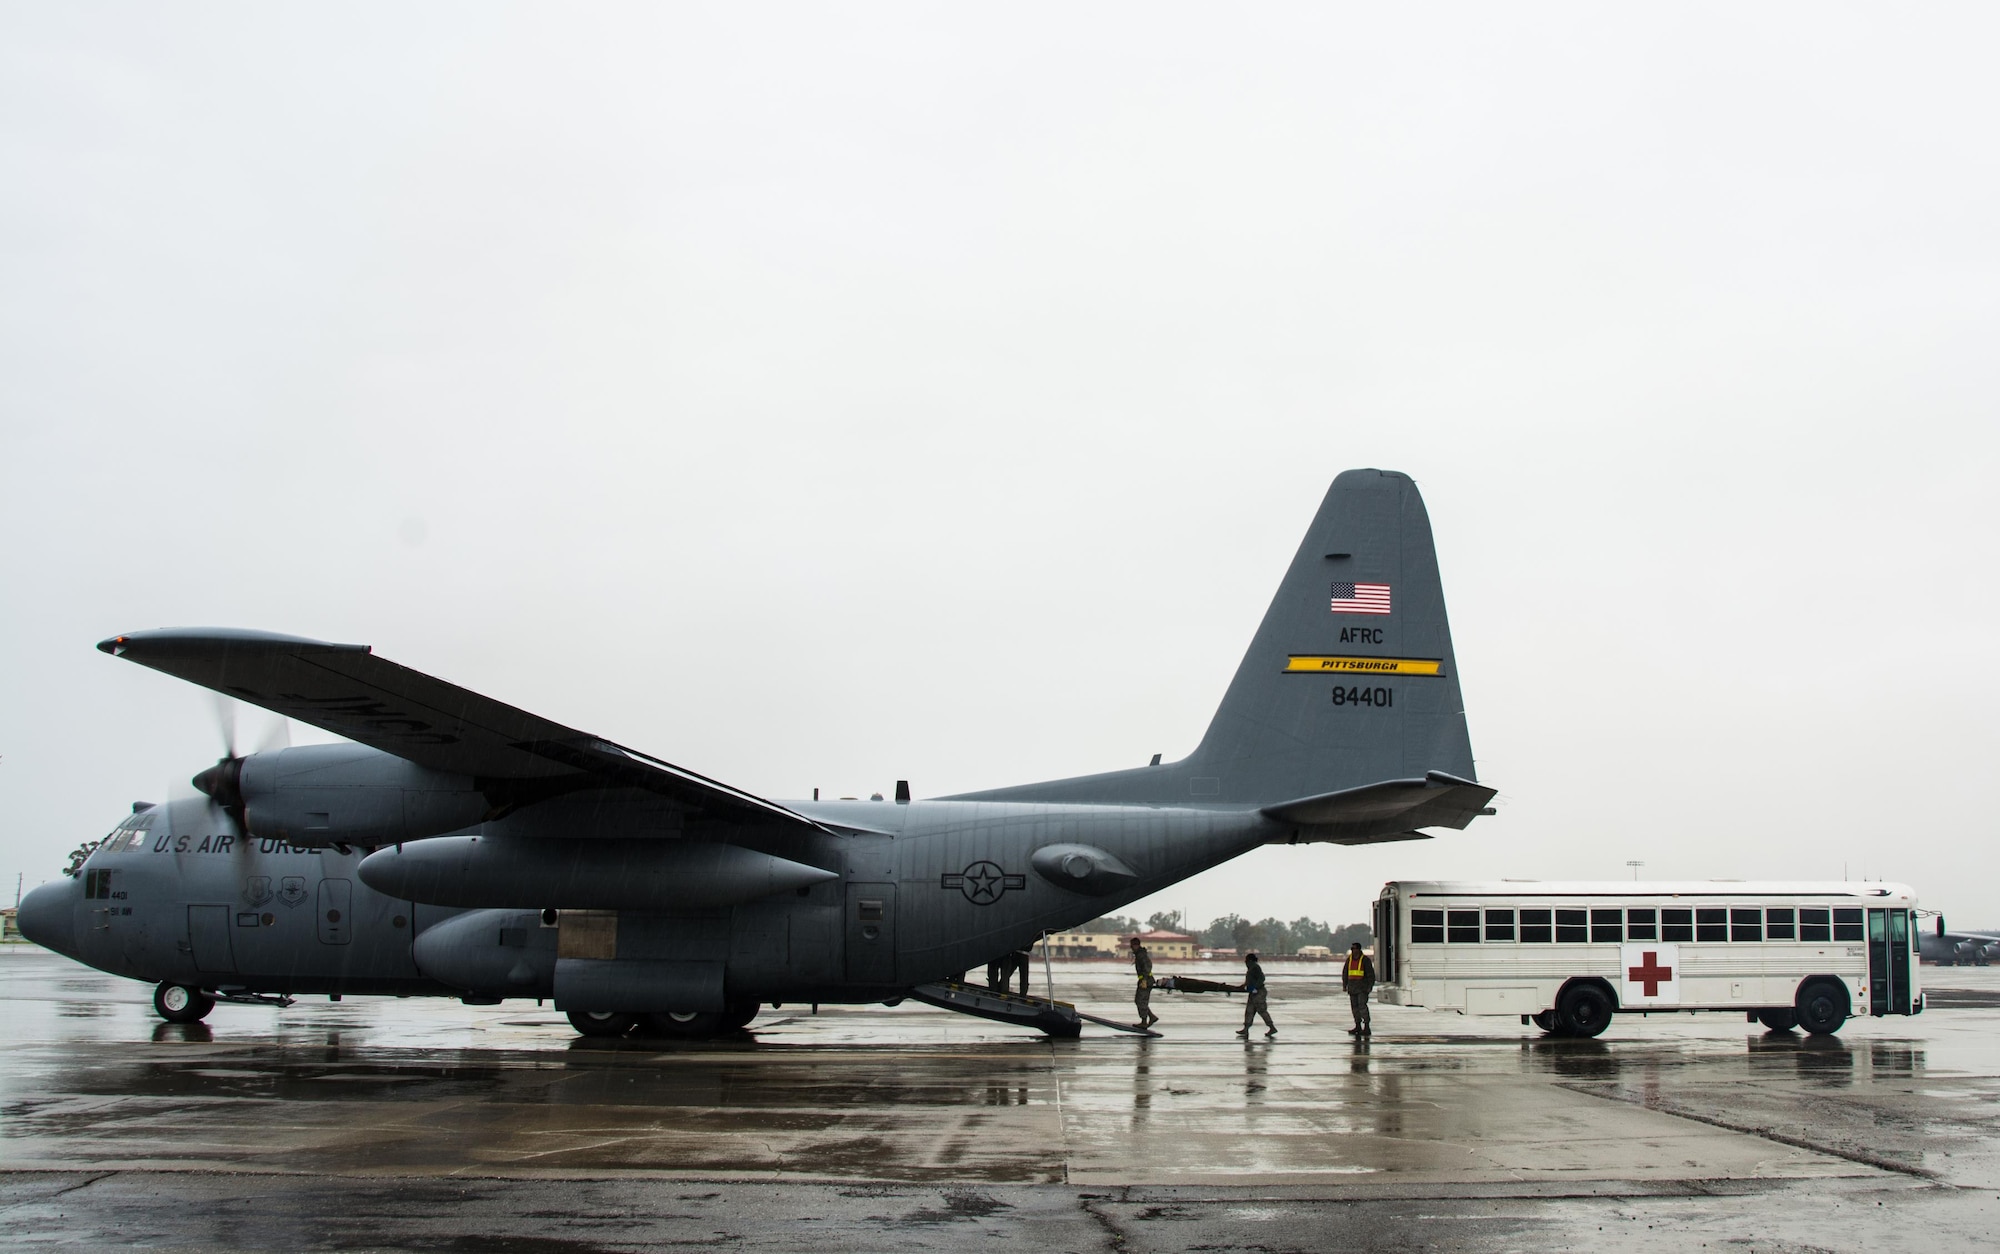 Members of the 60th Inpatient Squadron deliver a patient onto C-130 Hercules from Pittsburgh Air Reserve Station, Penn., during Patriot Delta at Travis Air Force Base, Calif. on March 24, 2017. Members of the 60th IPTS participated in the Air Force Reserve exercise Patriot Delta, providing enroute patient care and staging the medical manikins. (U.S. Air Force photo by Staff Sgt. Daniel Phelps)